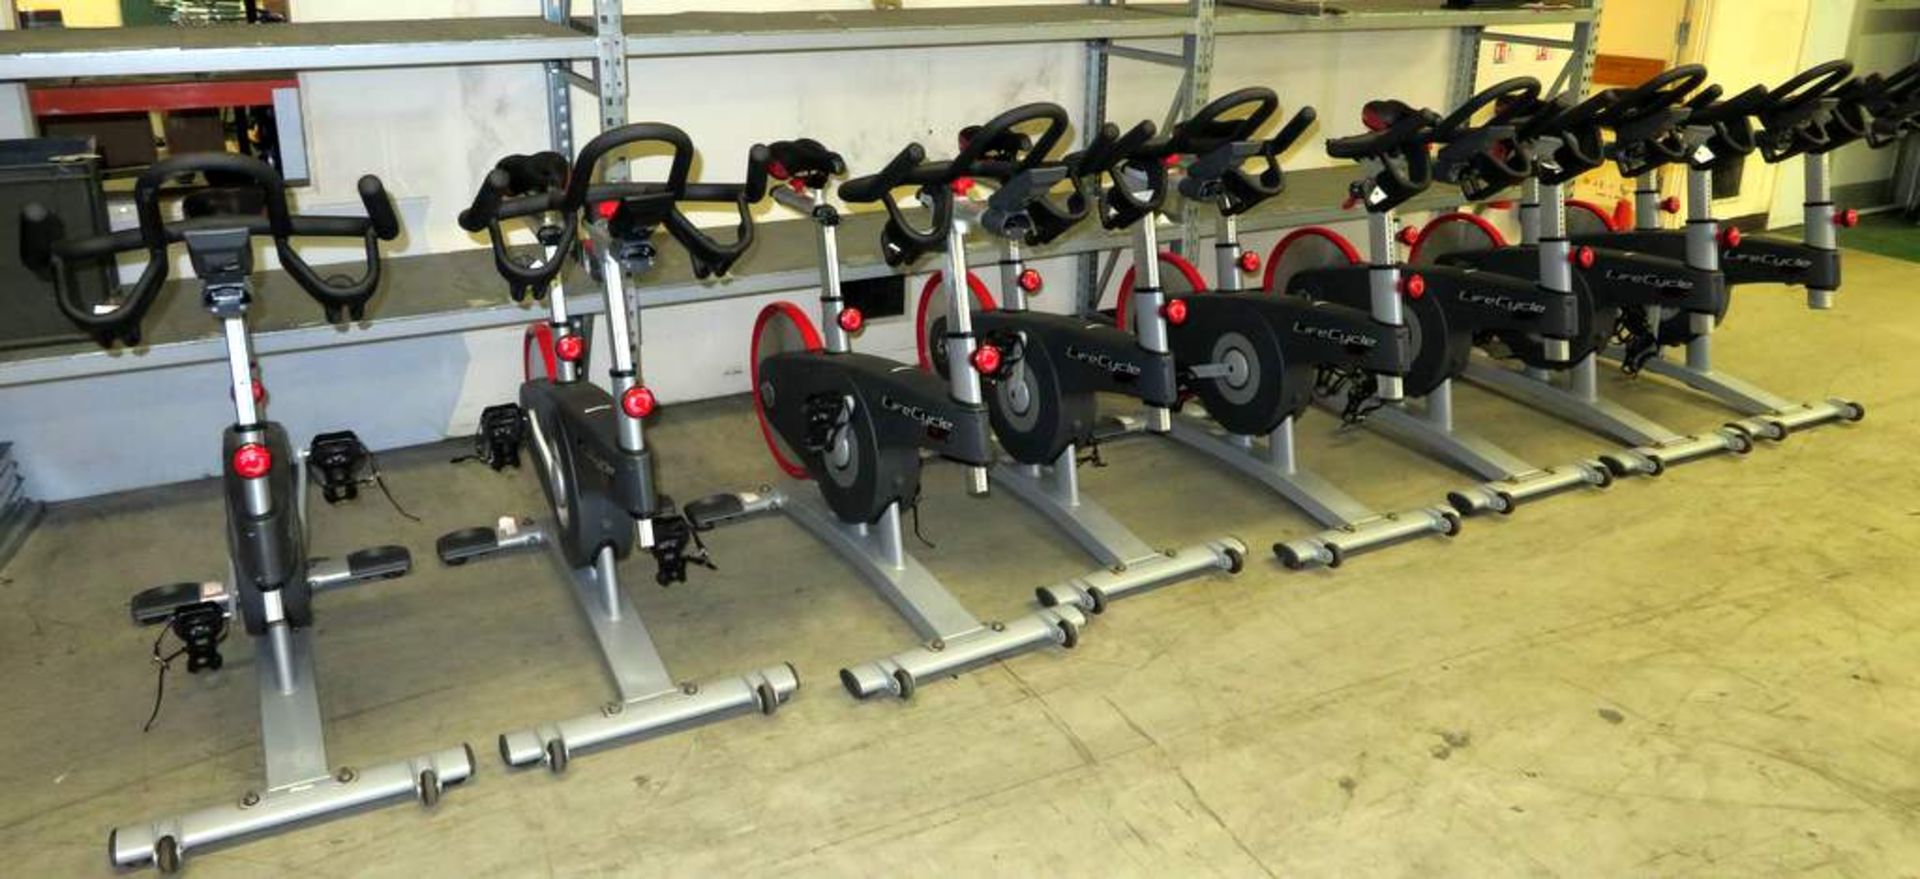 8x Life Fitness - Life Cycle GX spin bikes - Image 2 of 13